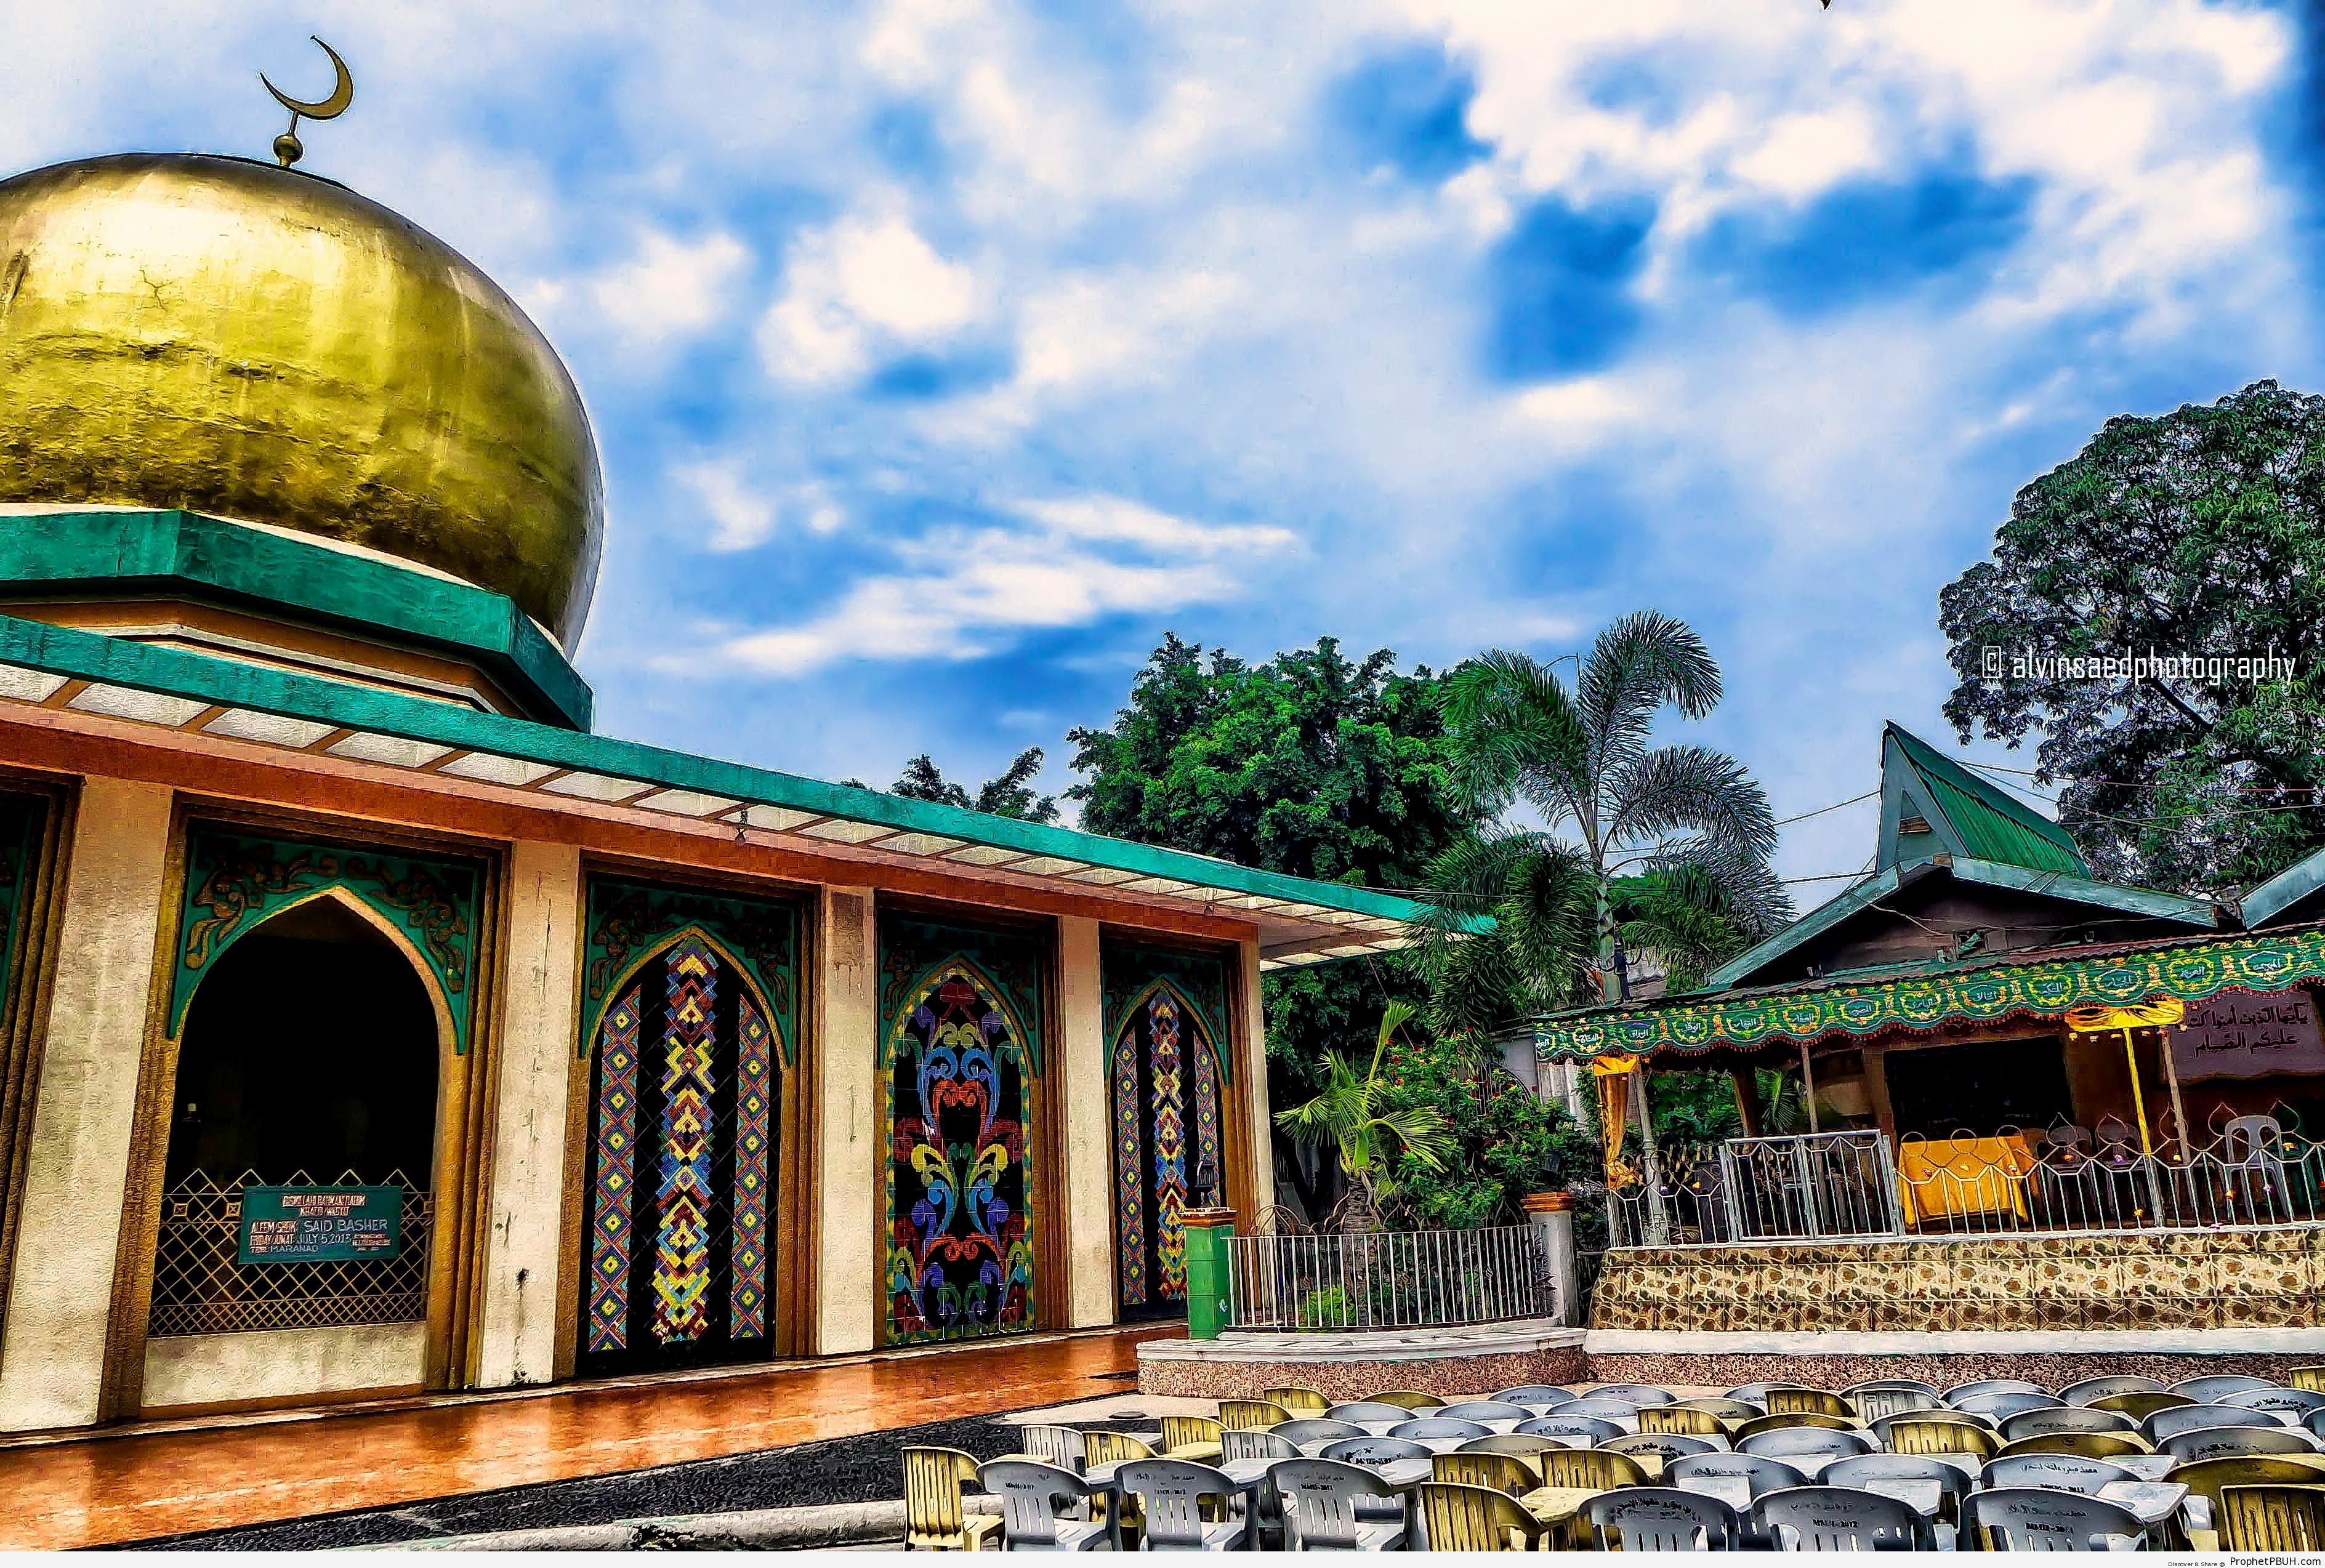 Masjid al-Dahab (The Golden Mosque) in Manila, Philippines - Artist- Alvin A. Saed -Picture